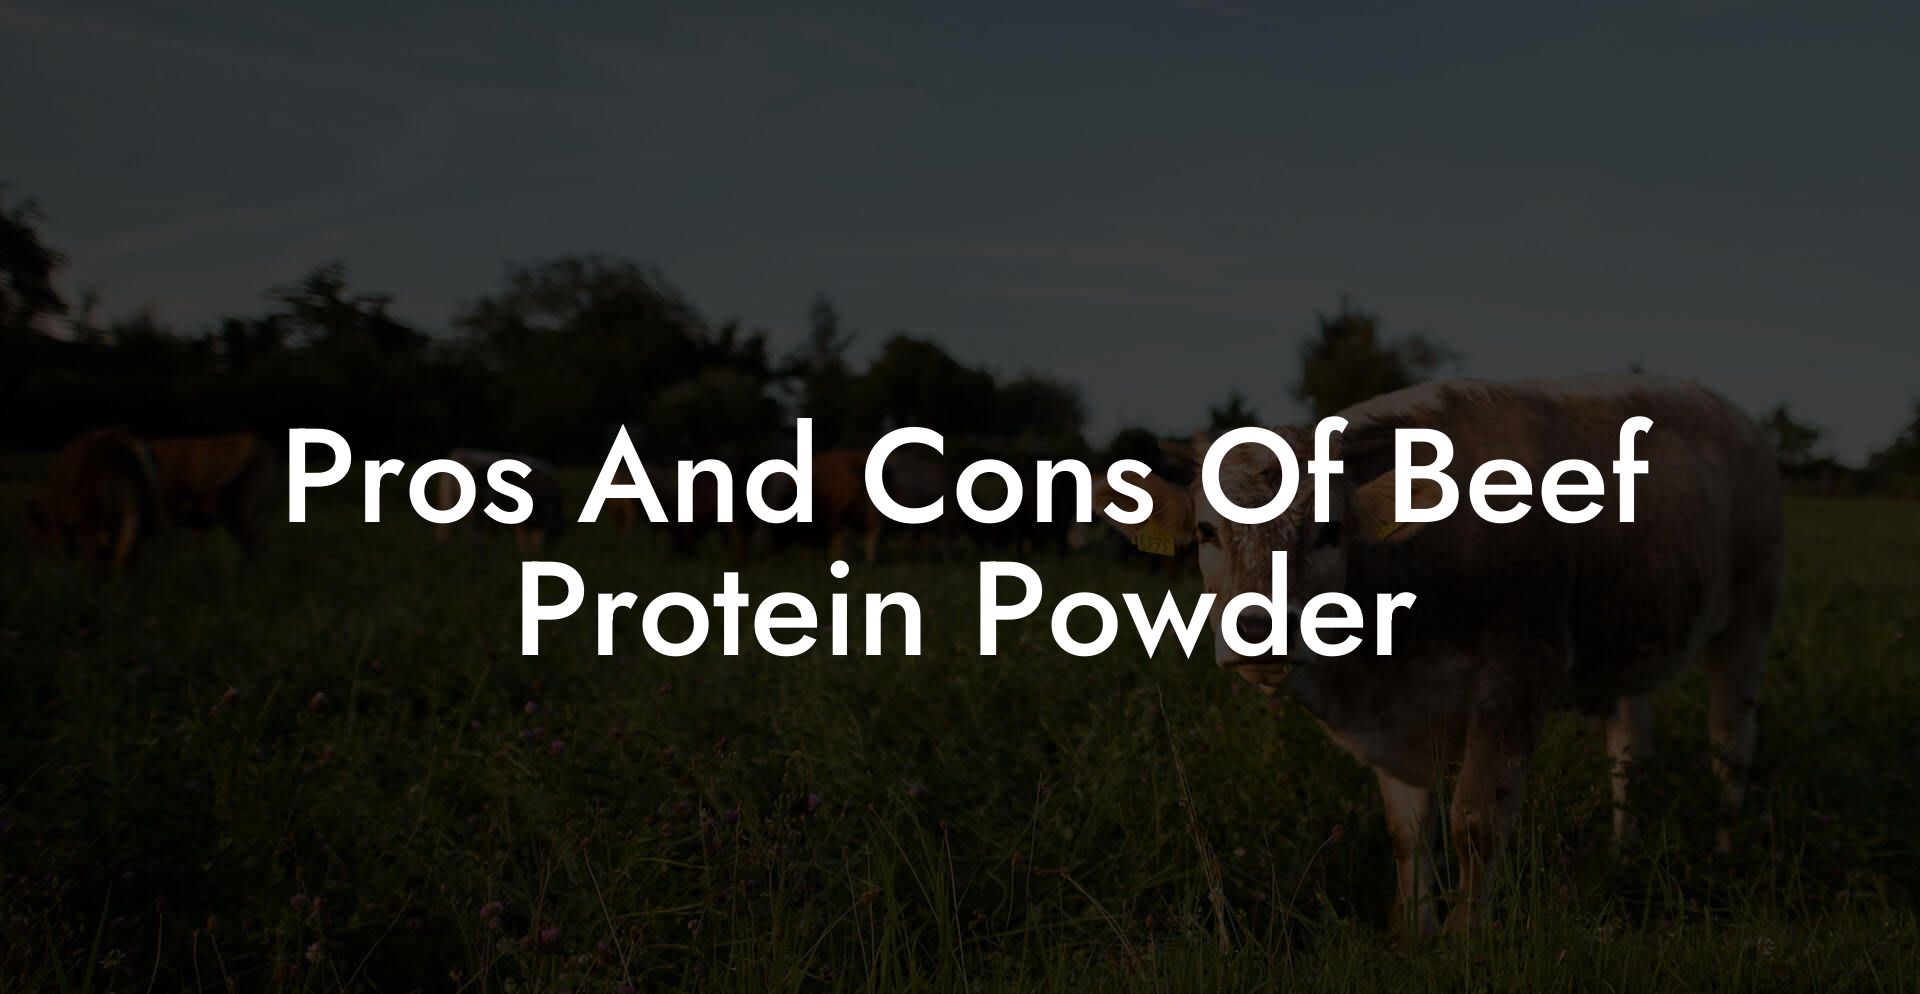 Pros And Cons Of Beef Protein Powder